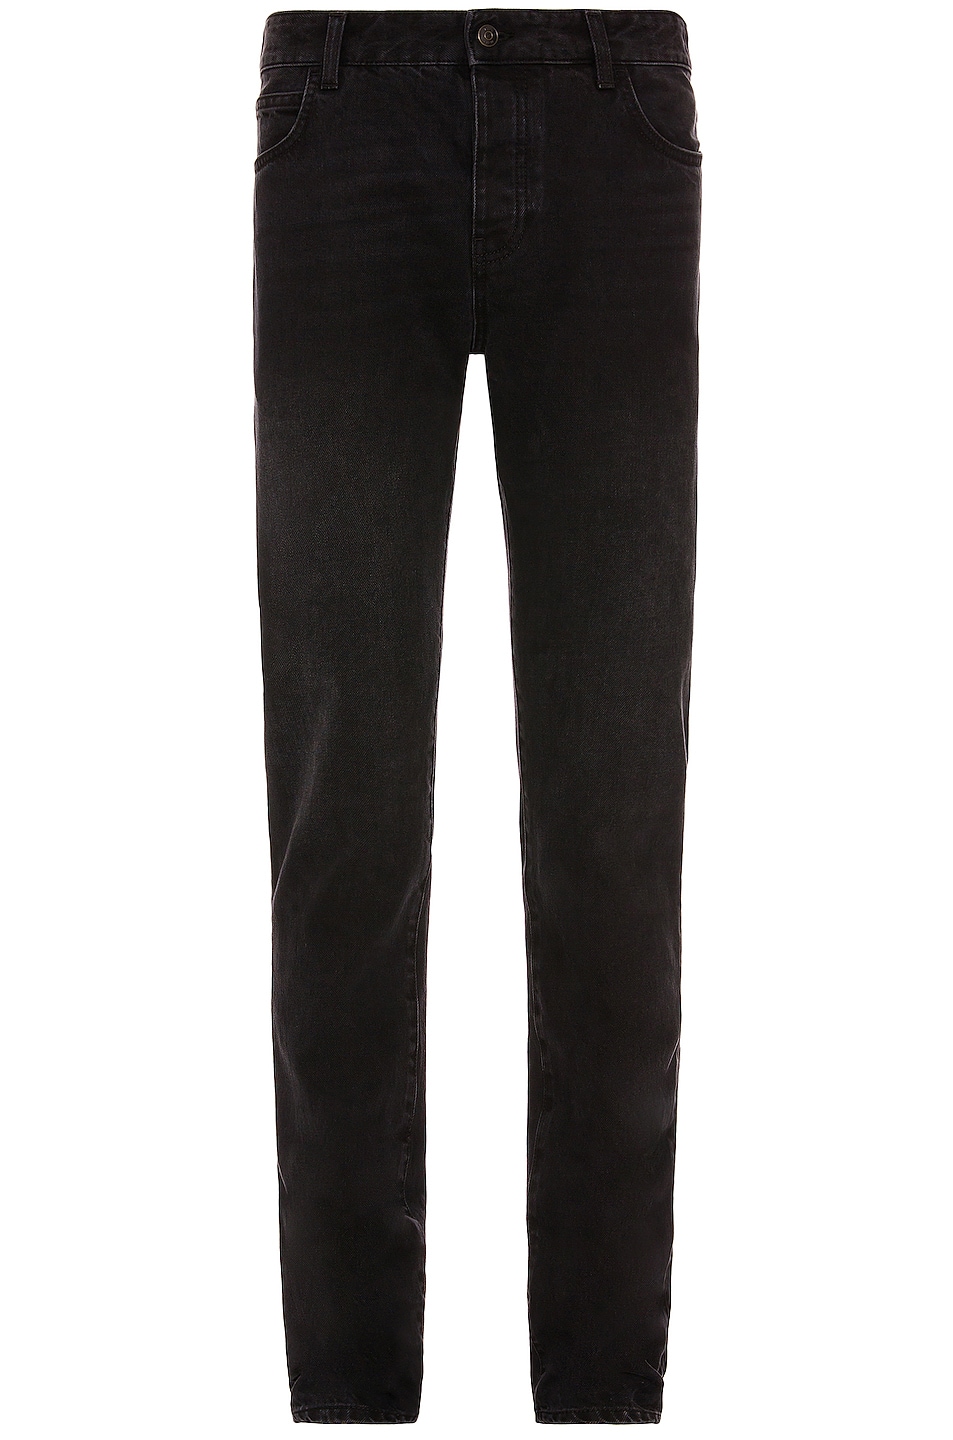 Image 1 of The Row Barrow Jeans in Black